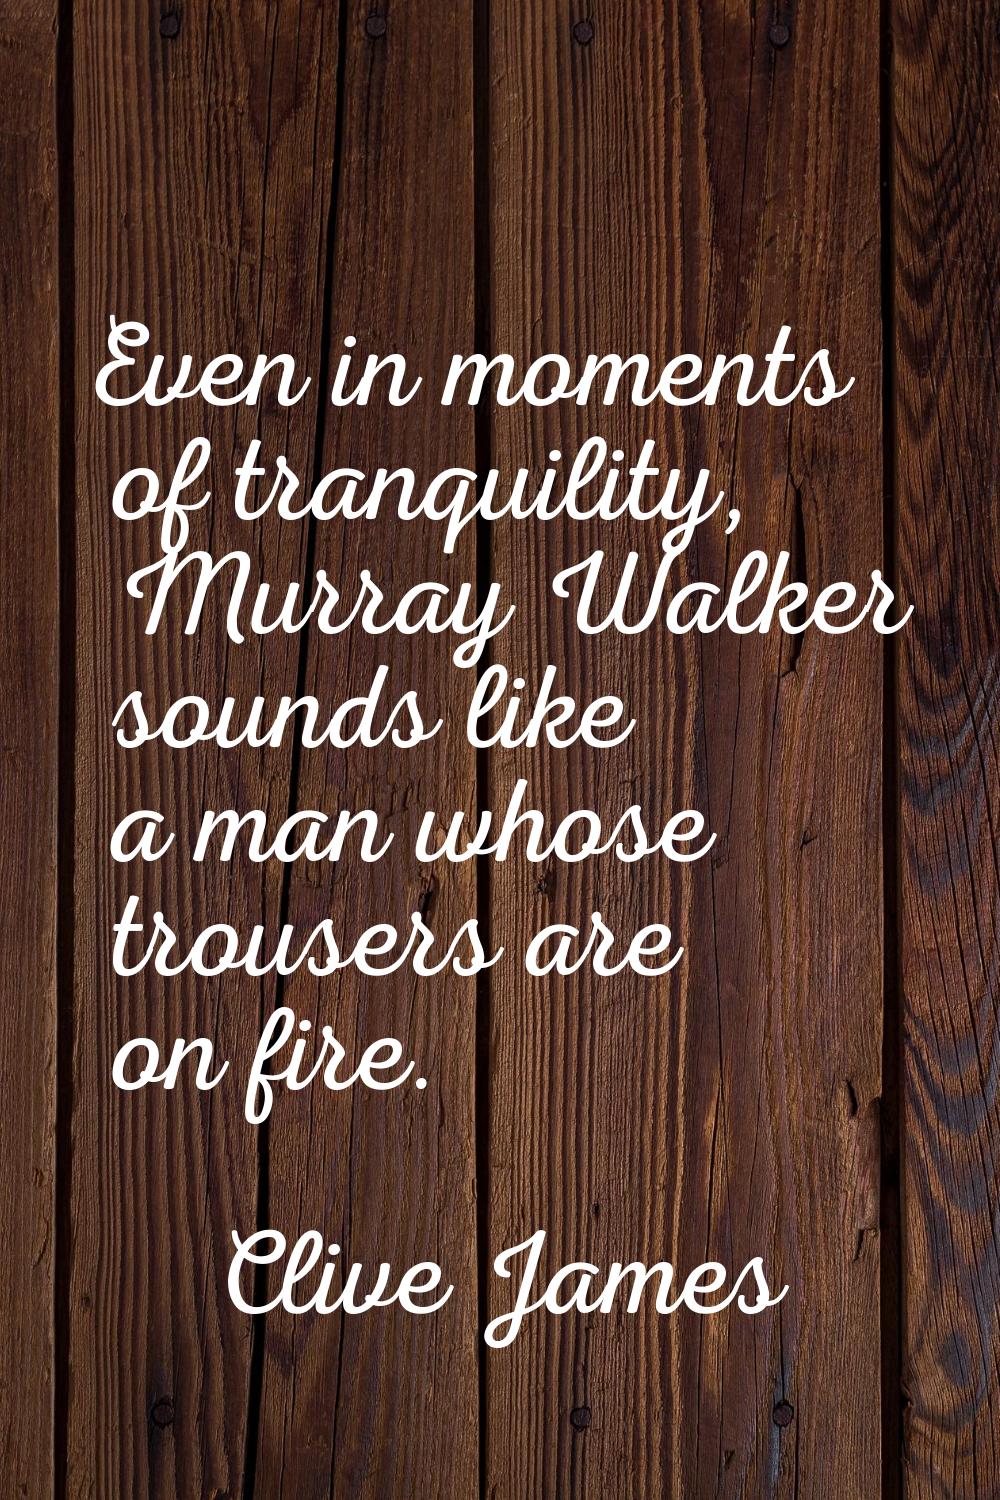 Even in moments of tranquility, Murray Walker sounds like a man whose trousers are on fire.